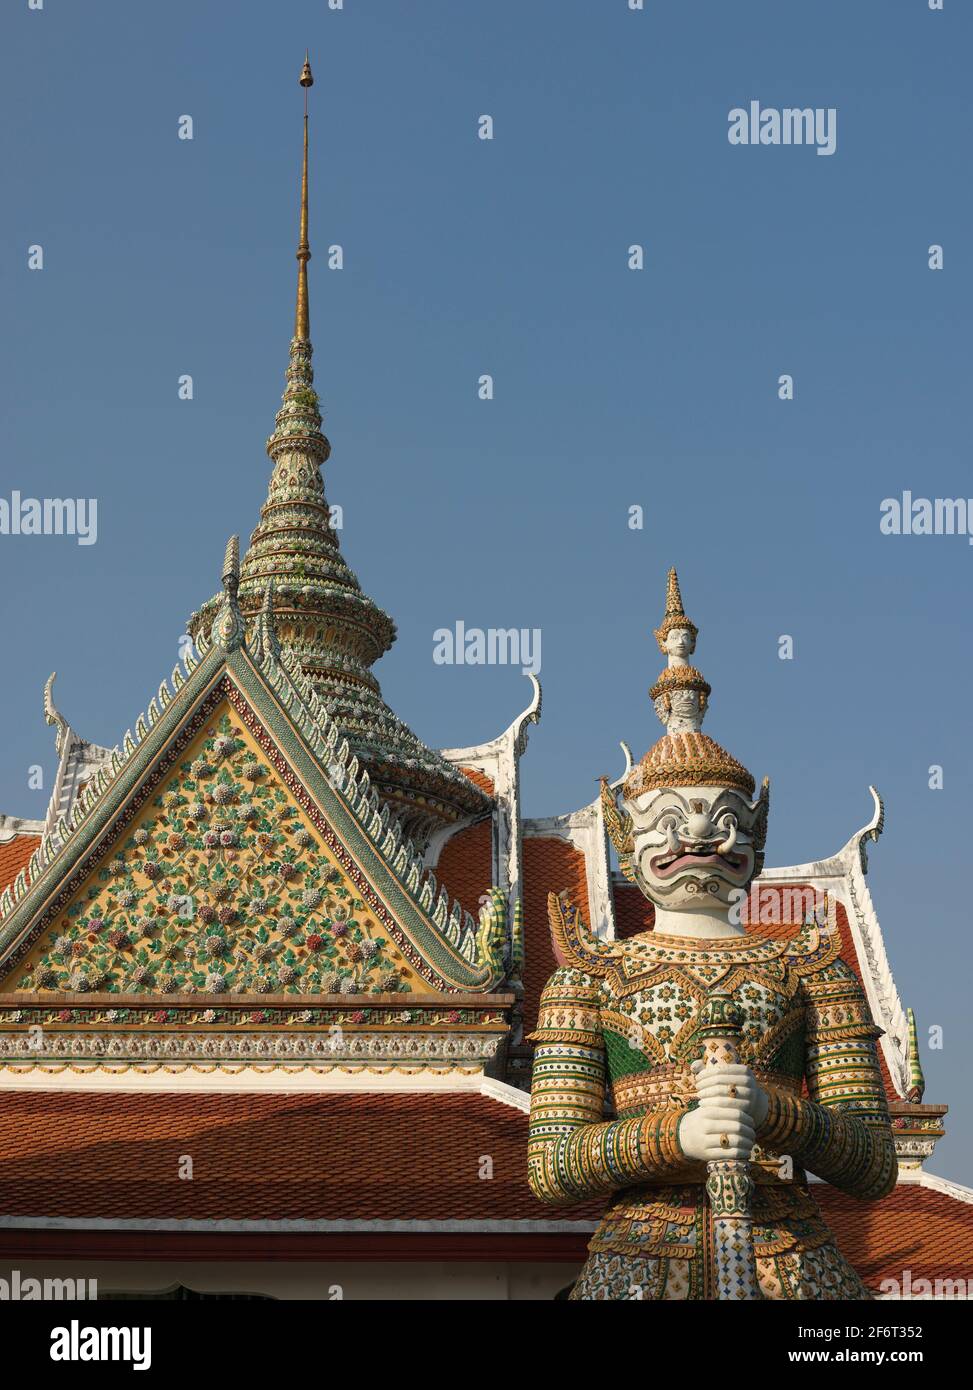 The Ordination Hall with a Niramitr Buddha image supposedly designed by King Rama II. The front entrance of the Ordination Hall has a roof with a Stock Photo